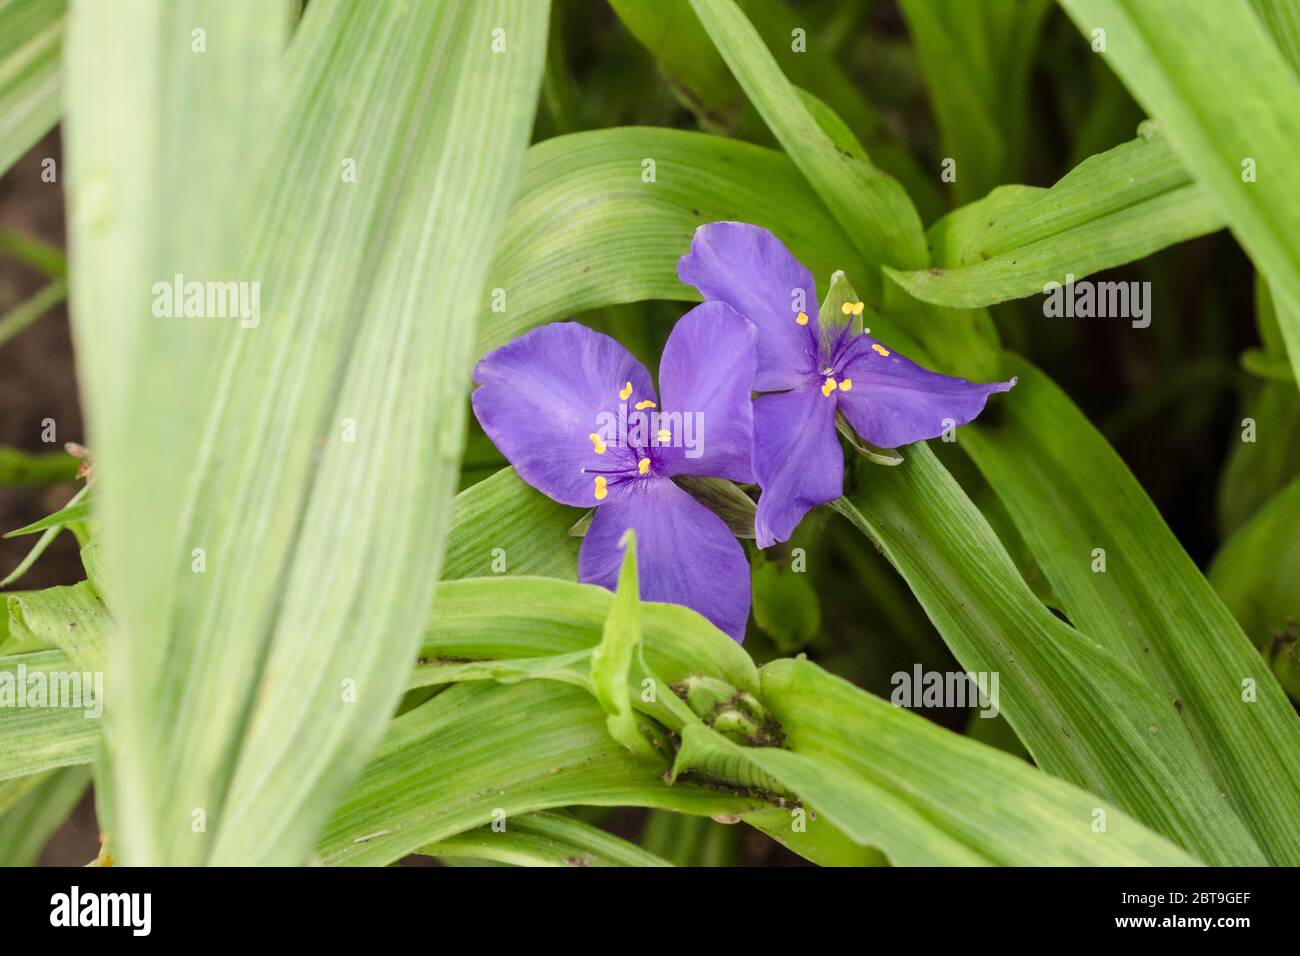 a purple or lavender Spiderwort blossom peaking out from between the leaves Stock Photo